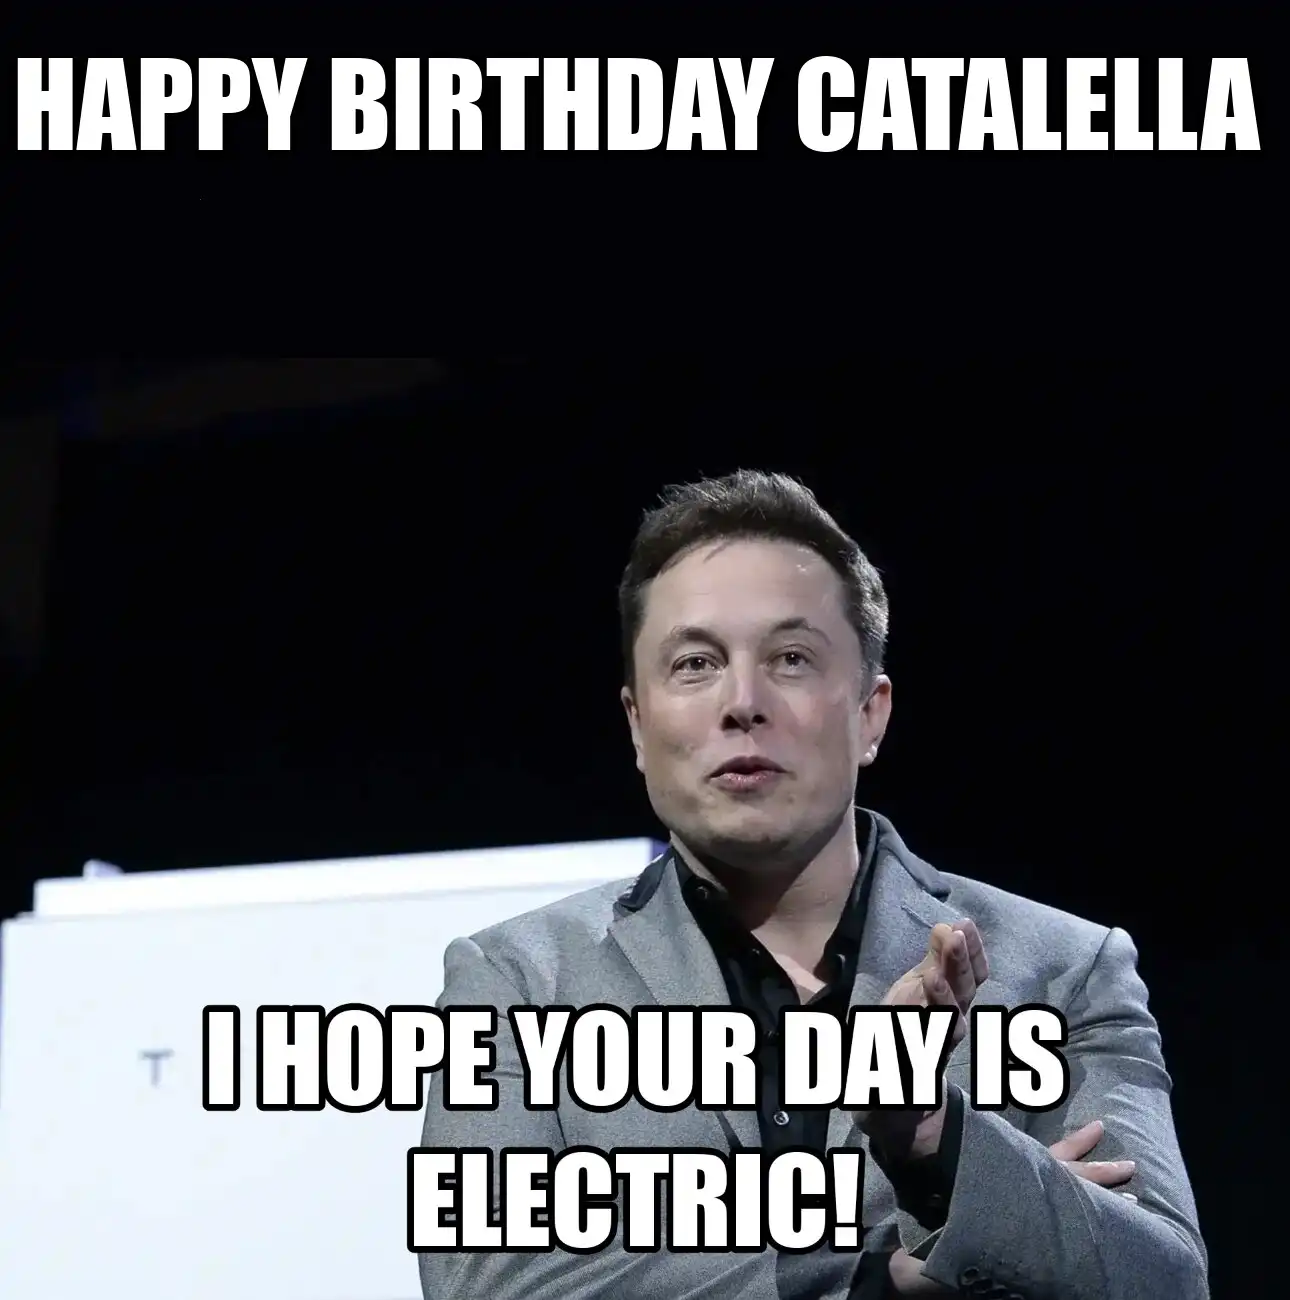 Happy Birthday Catalella I Hope Your Day Is Electric Meme